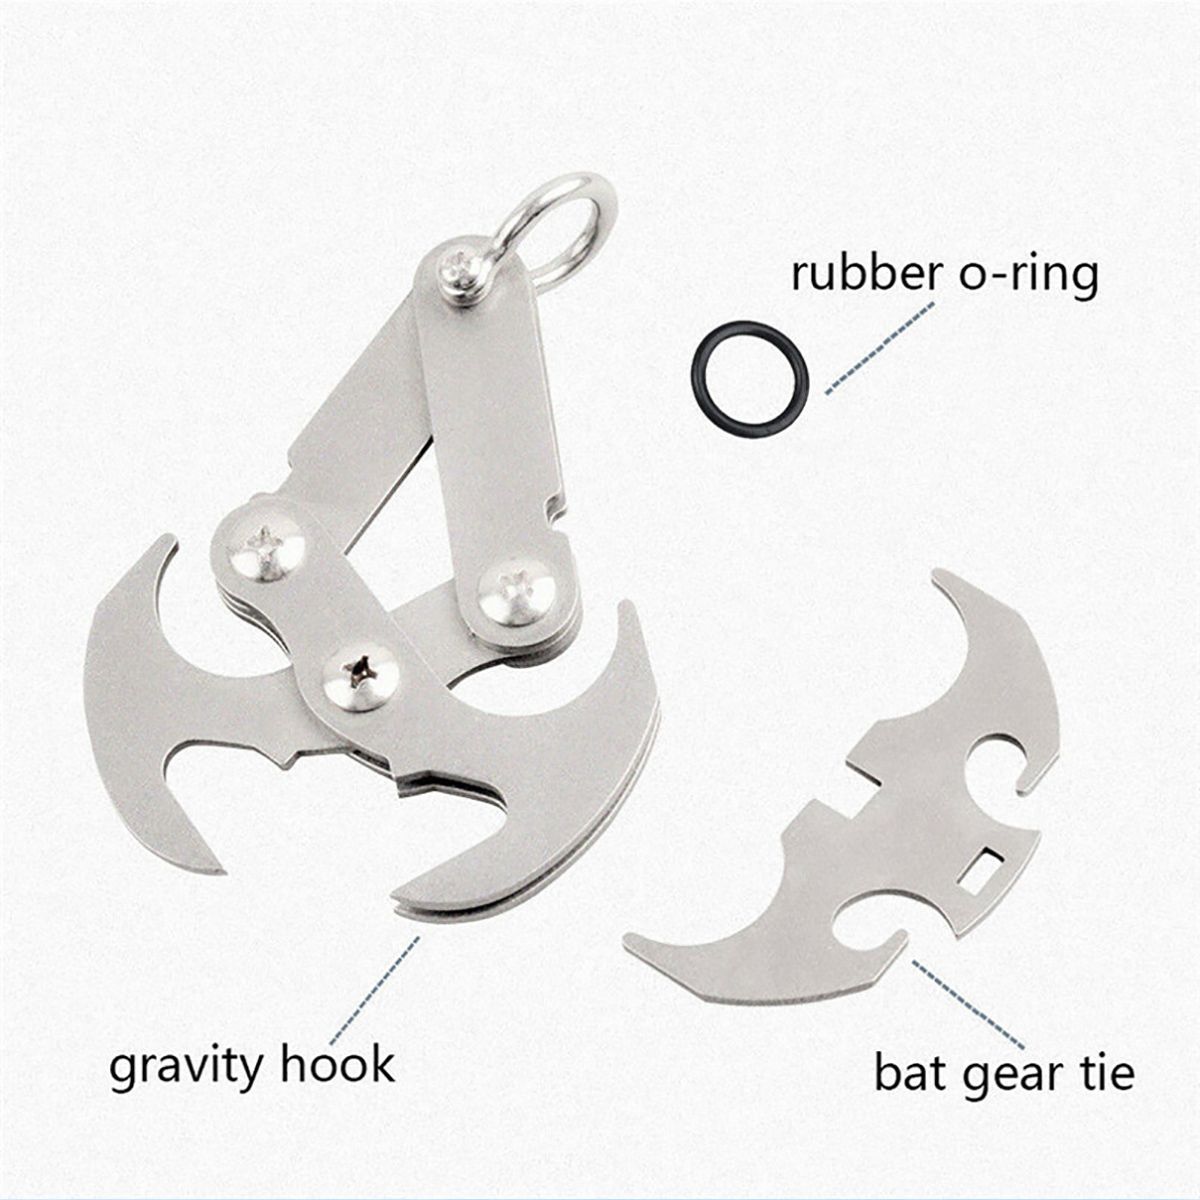 304-Stainless-Steel-Climbing-Claw-Gravity-Grappling-Hooks-Survival-Grappling-Tool-1624229